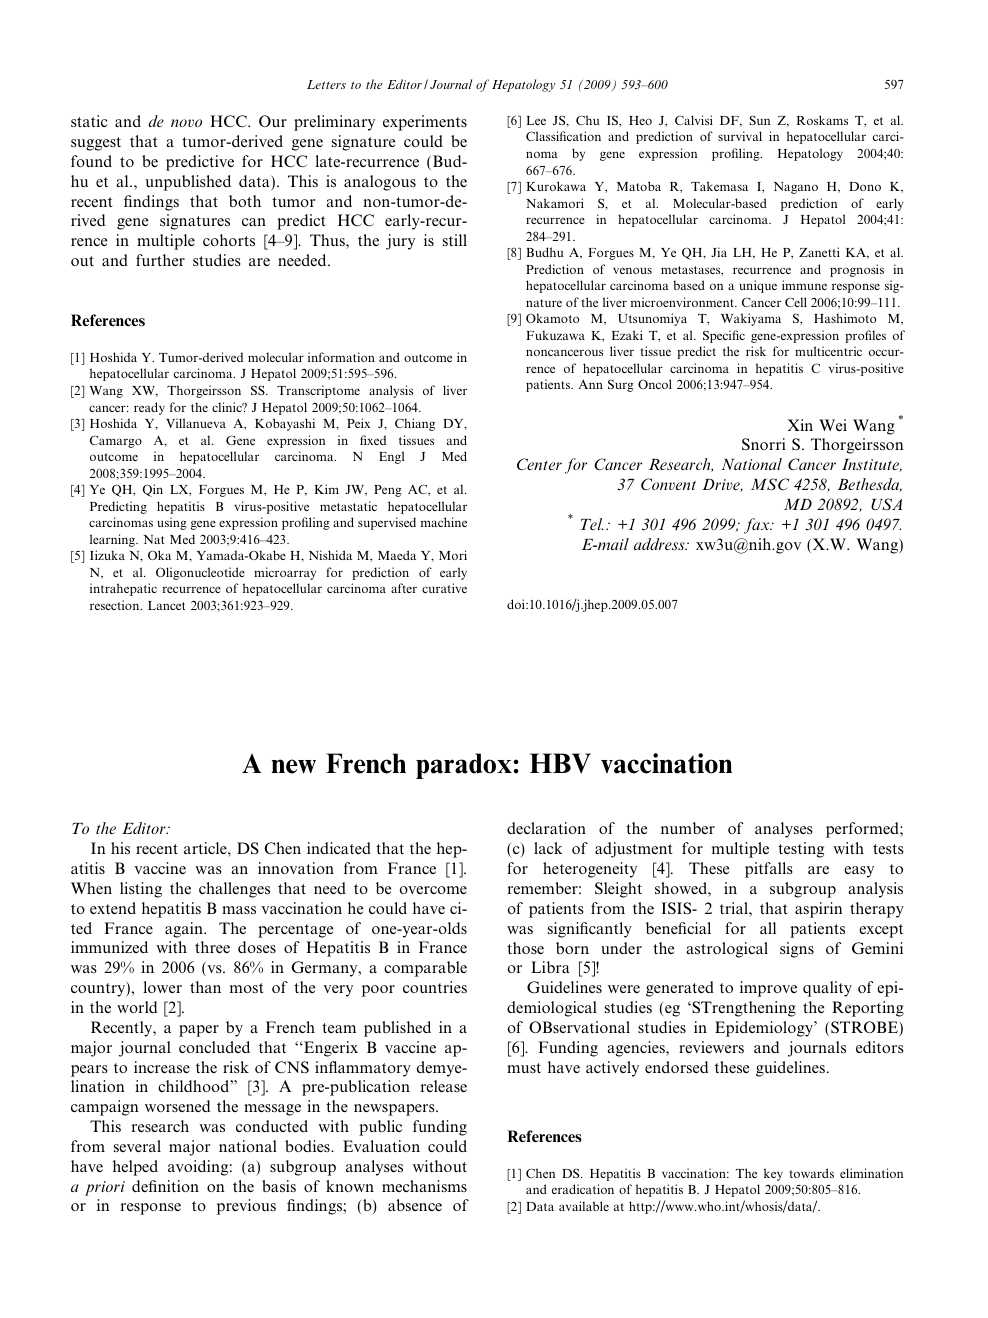 A New French Paradox Hbv Vaccination Topic Of Research Paper In Clinical Medicine Download Scholarly Article Pdf And Read For Free On Cyberleninka Open Science Hub